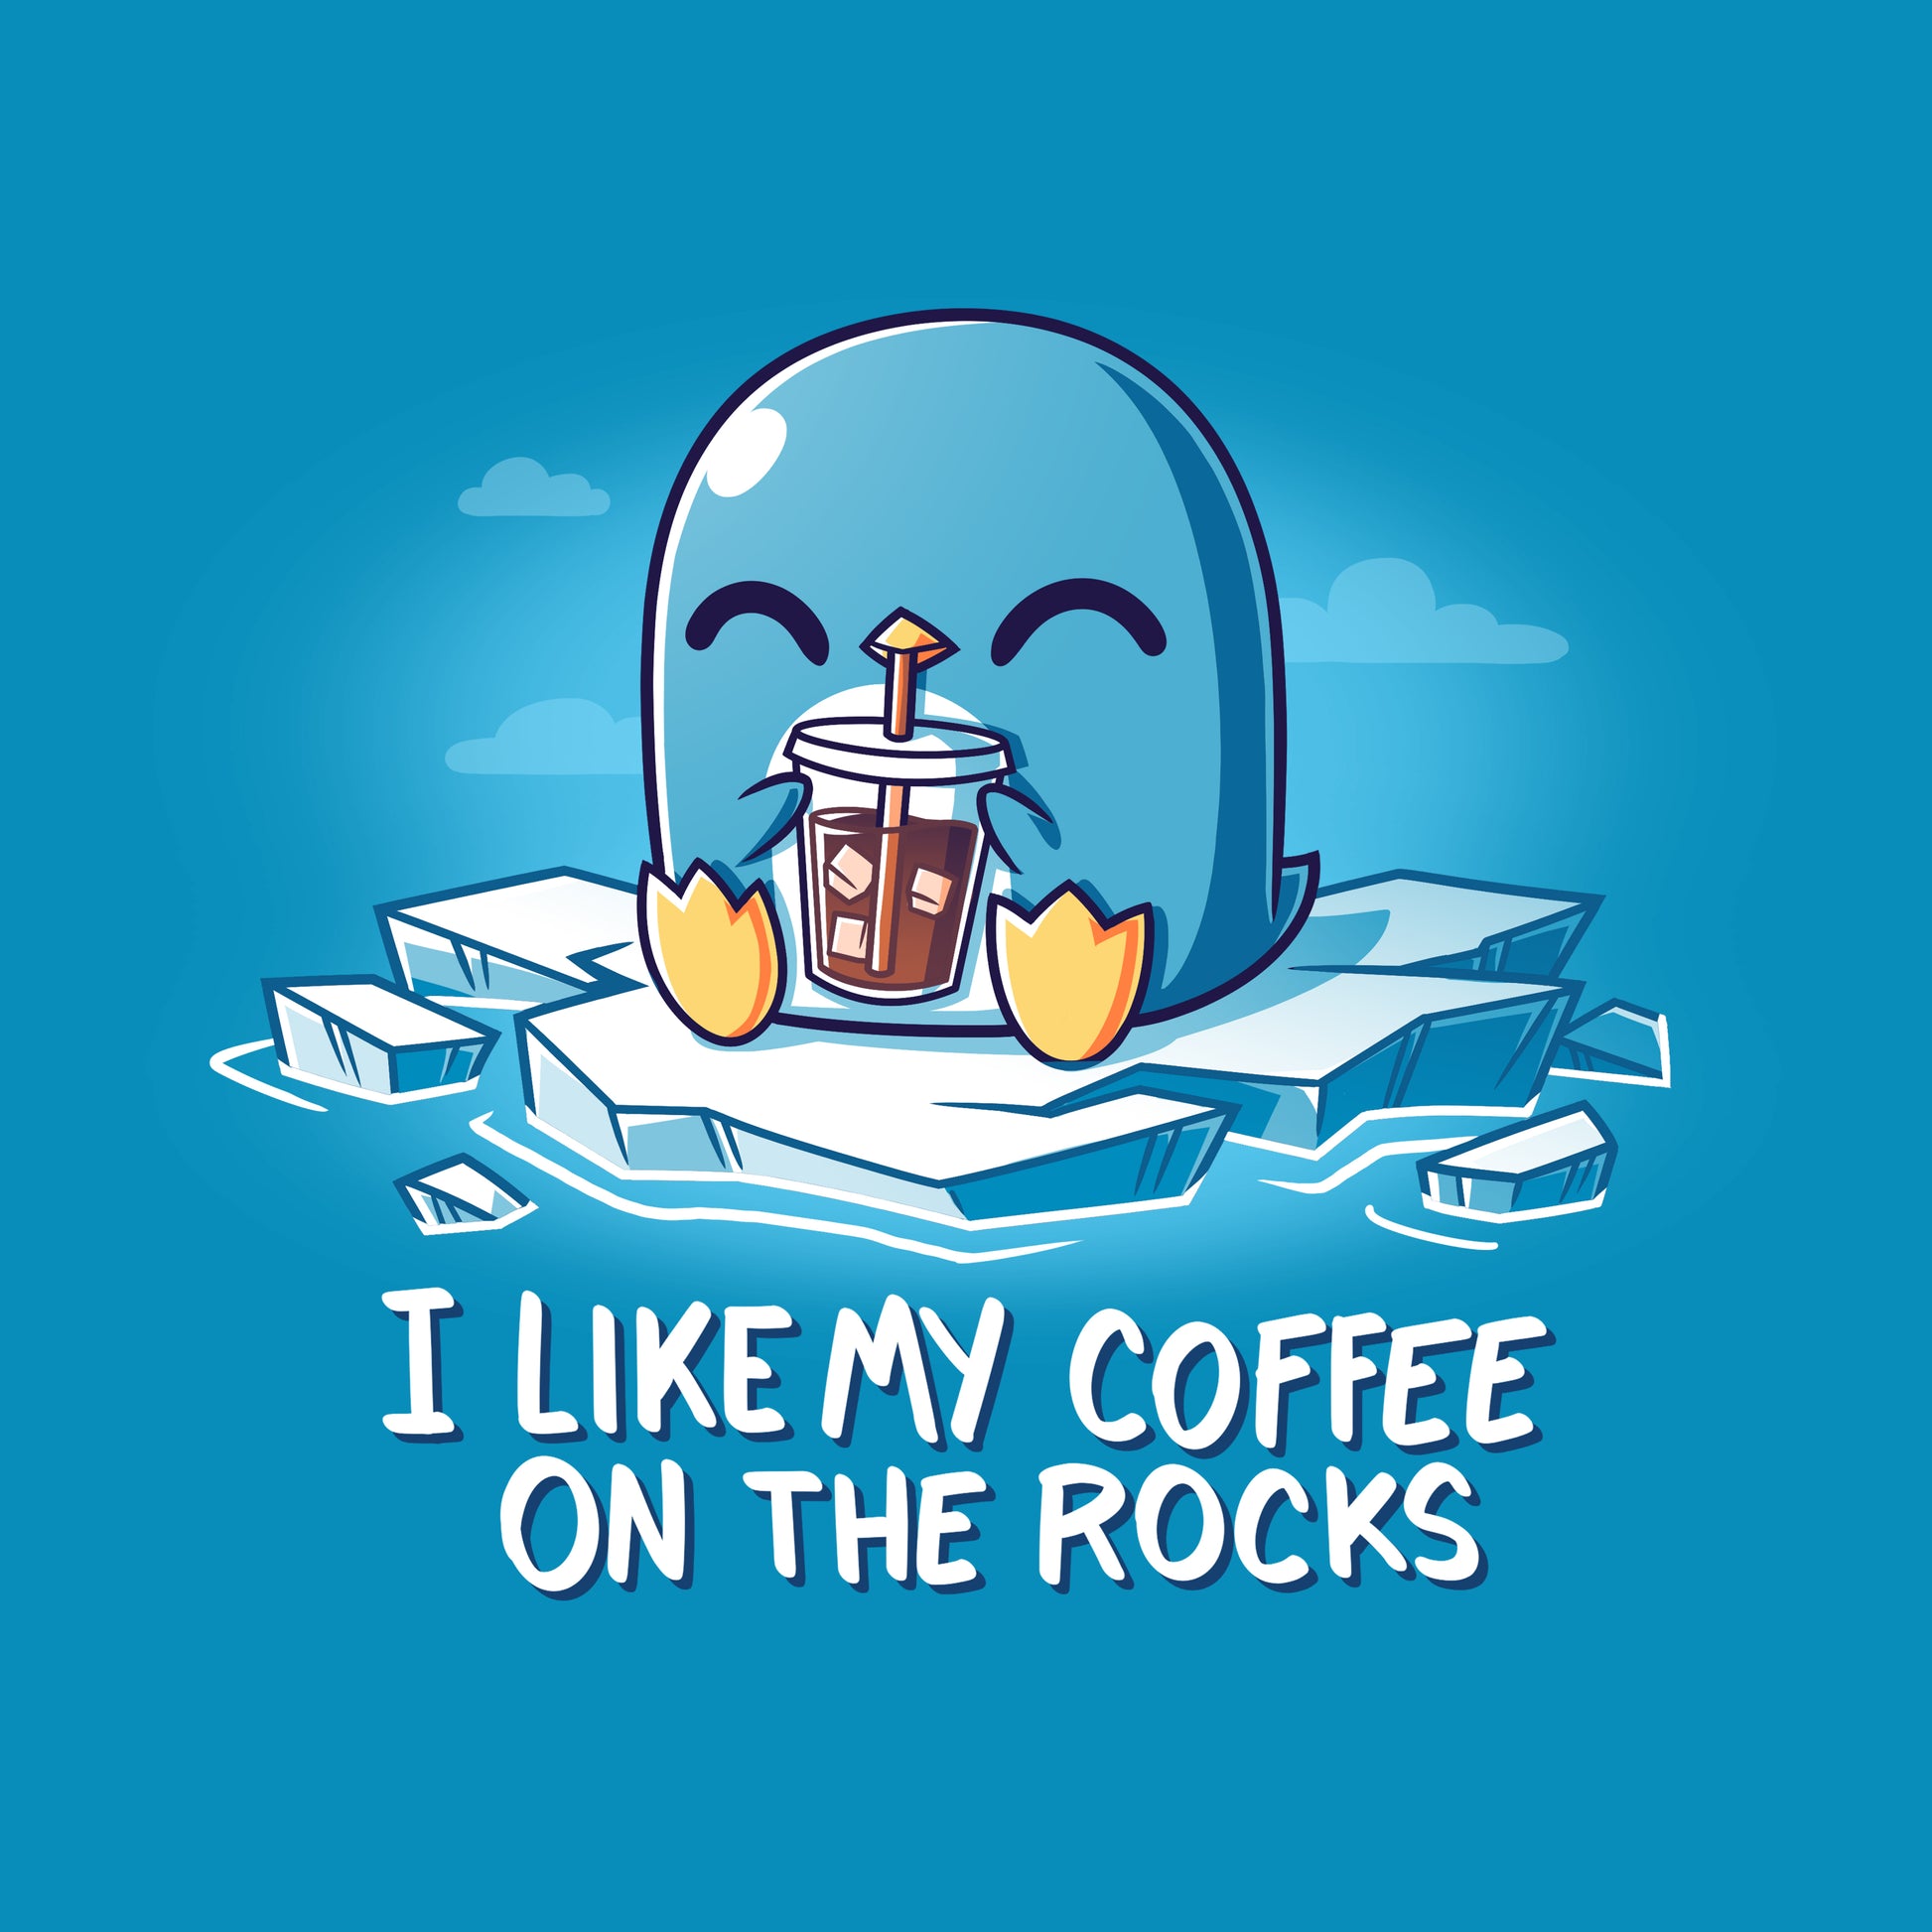 A blue cartoon penguin sits on ice, happily holding a cup of iced coffee with a straw, sporting a cobalt blue t-shirt. The text below reads, "I Like My Coffee on the Rocks by monsterdigital.